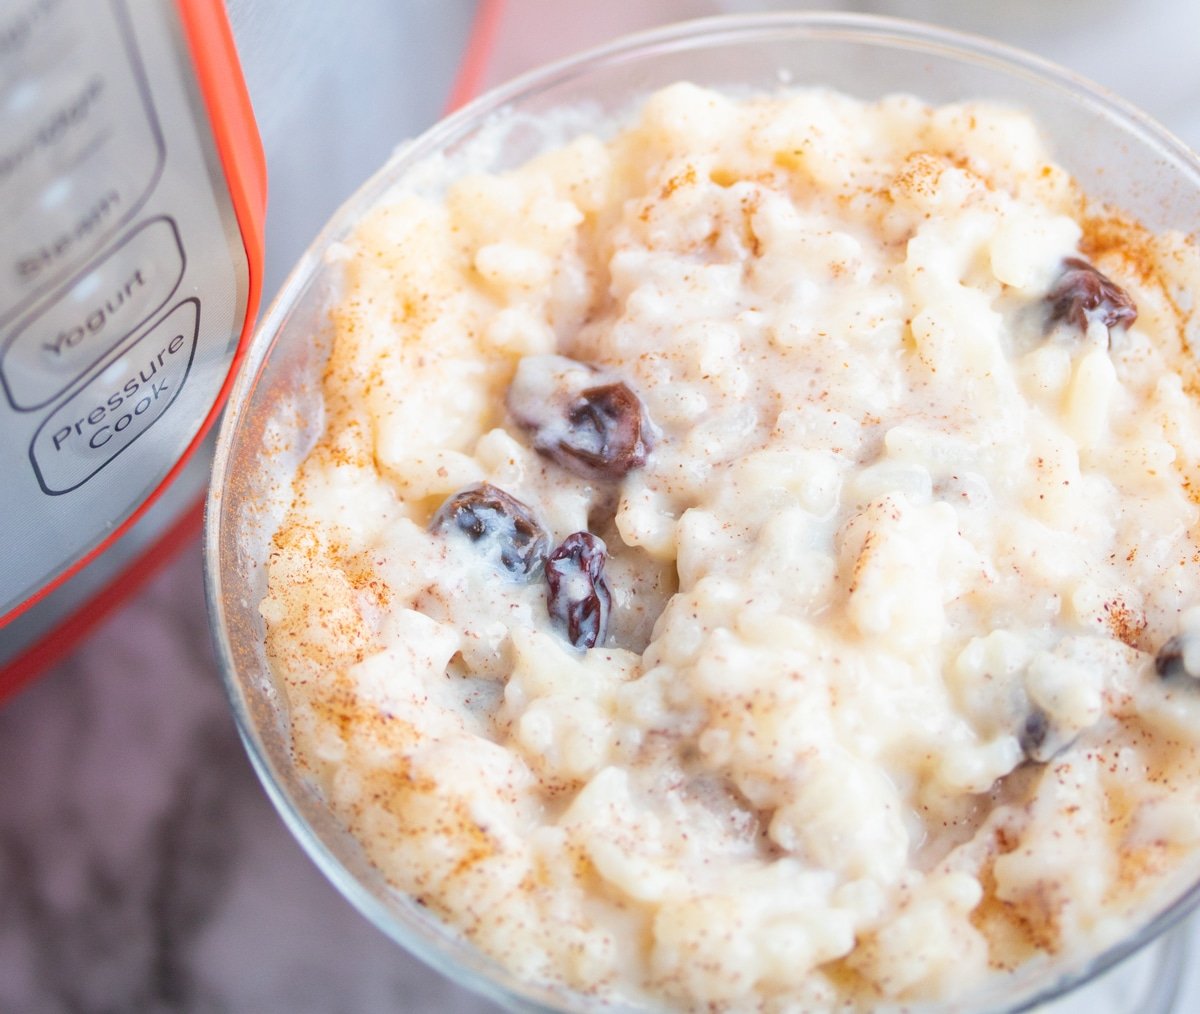 https://www.myforkinglife.com/wp-content/uploads/2019/11/instant-pot-rice-pudding-for-the-box.jpg